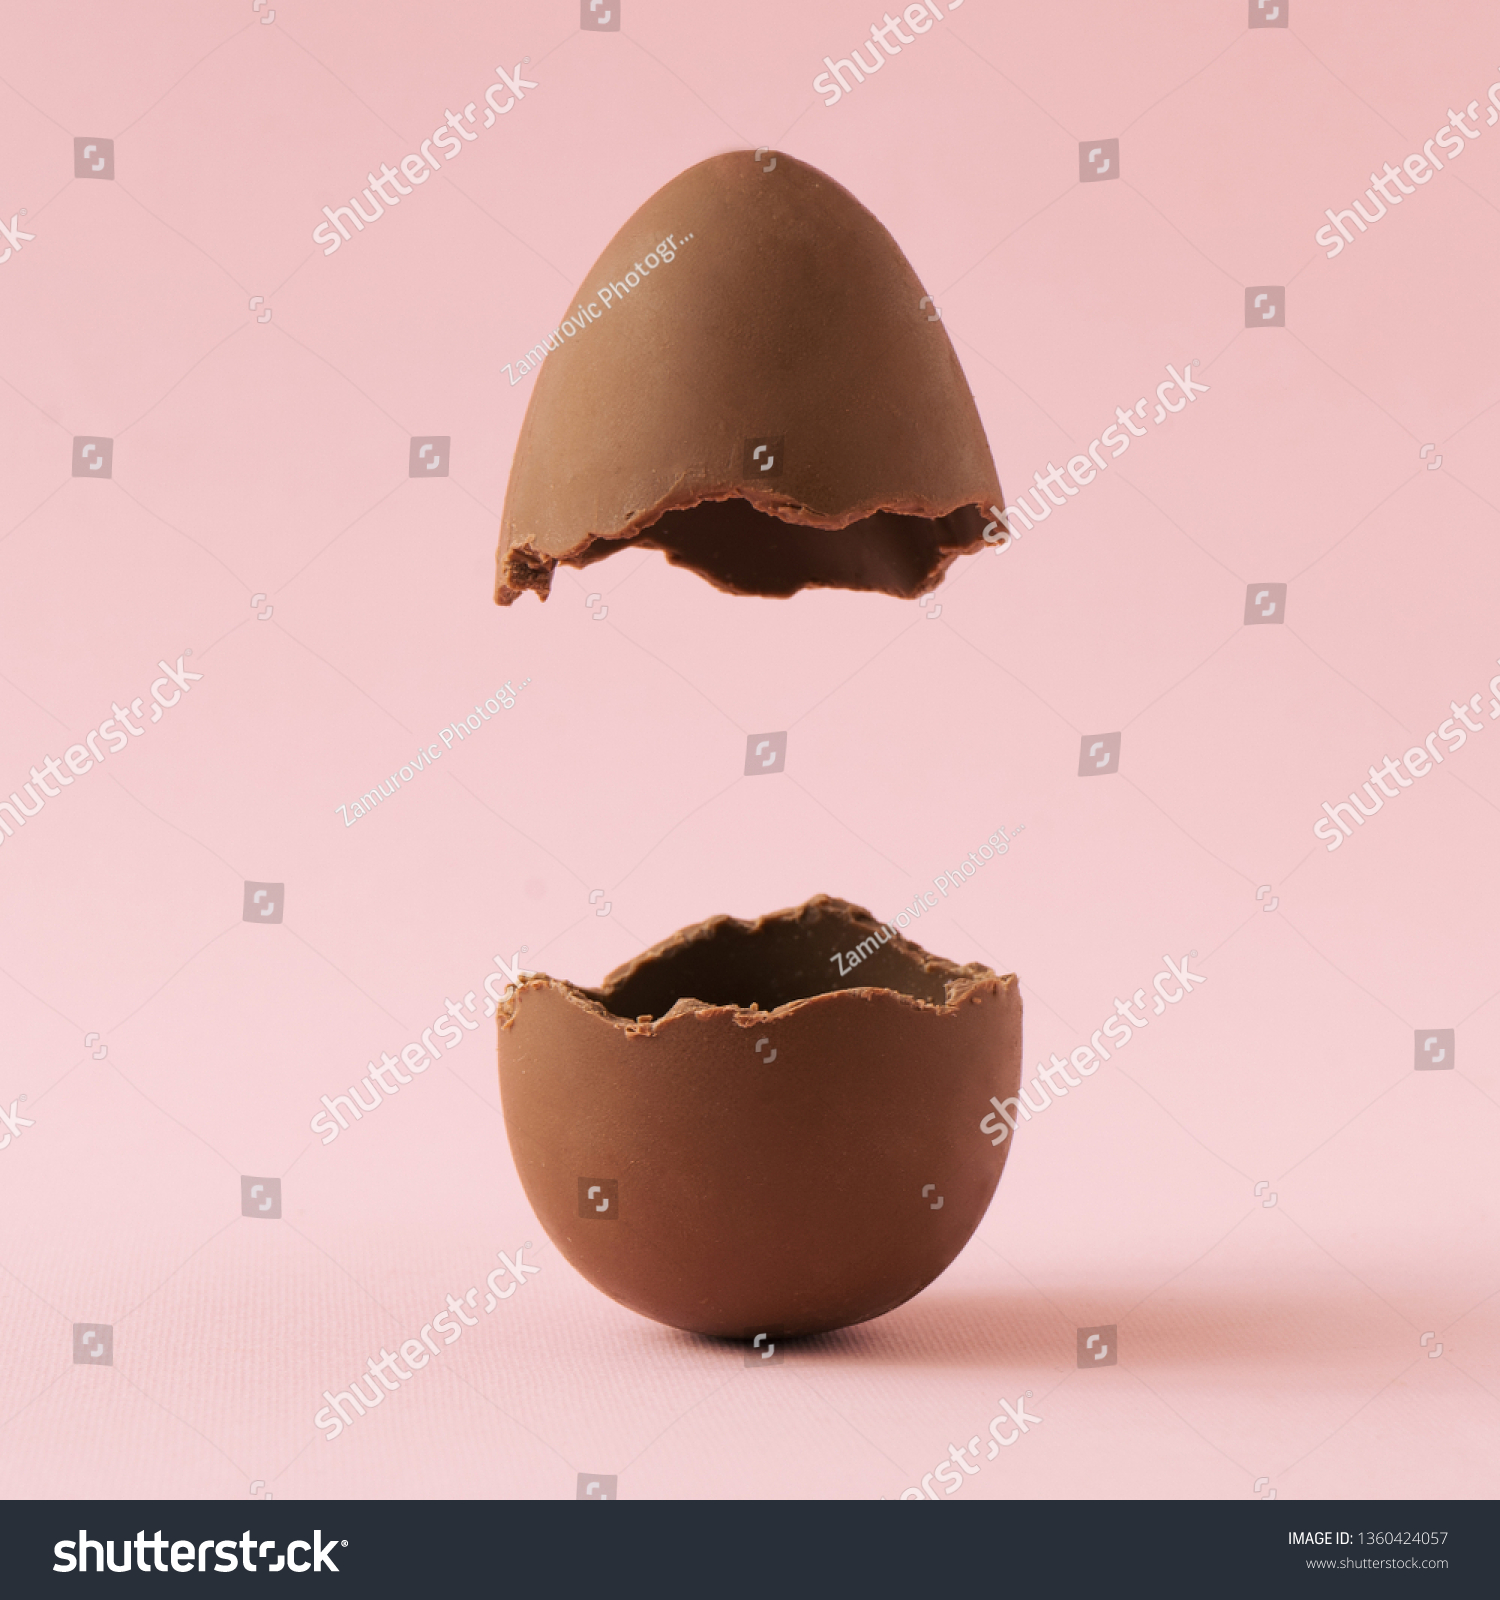 Chocolate Easter egg broken in half on pastel pink background with creative copy space. Minimal Easter holiday concept. #1360424057